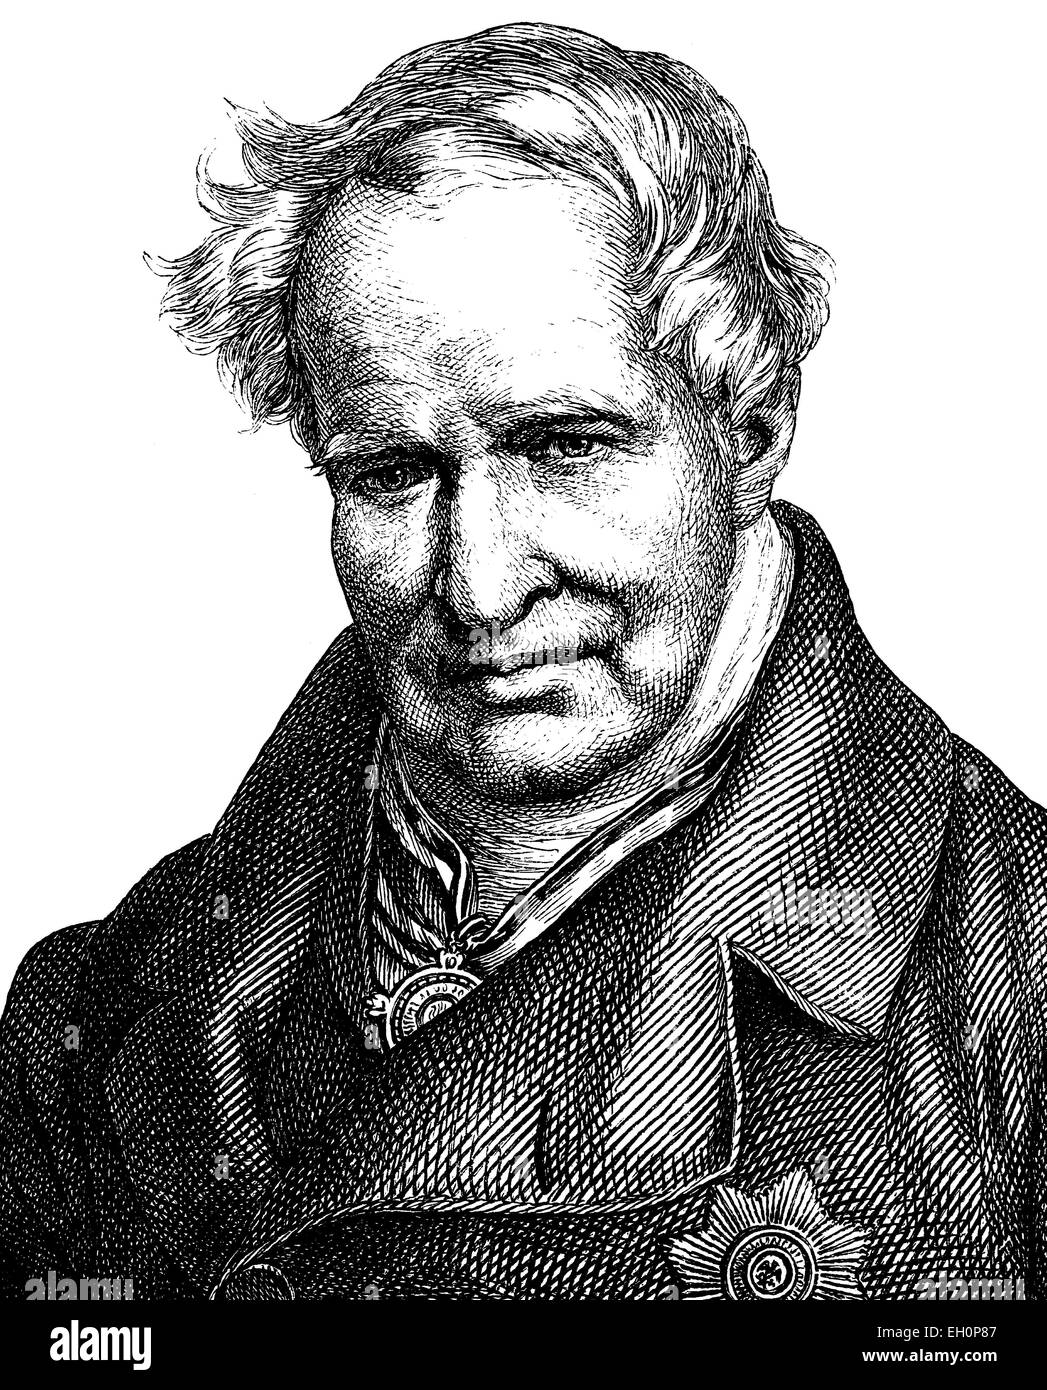 Portrait of Friedrich Wilhelm Heinrich Alexander von Humboldt, 14 September 1769 - 6 May 1859, was a Prussian geographer, naturalist, explorer and influential proponent of Romantic philosophy and science, Germany, digital improved reproduction of a woodcut publication from the year 1888 Stock Photo